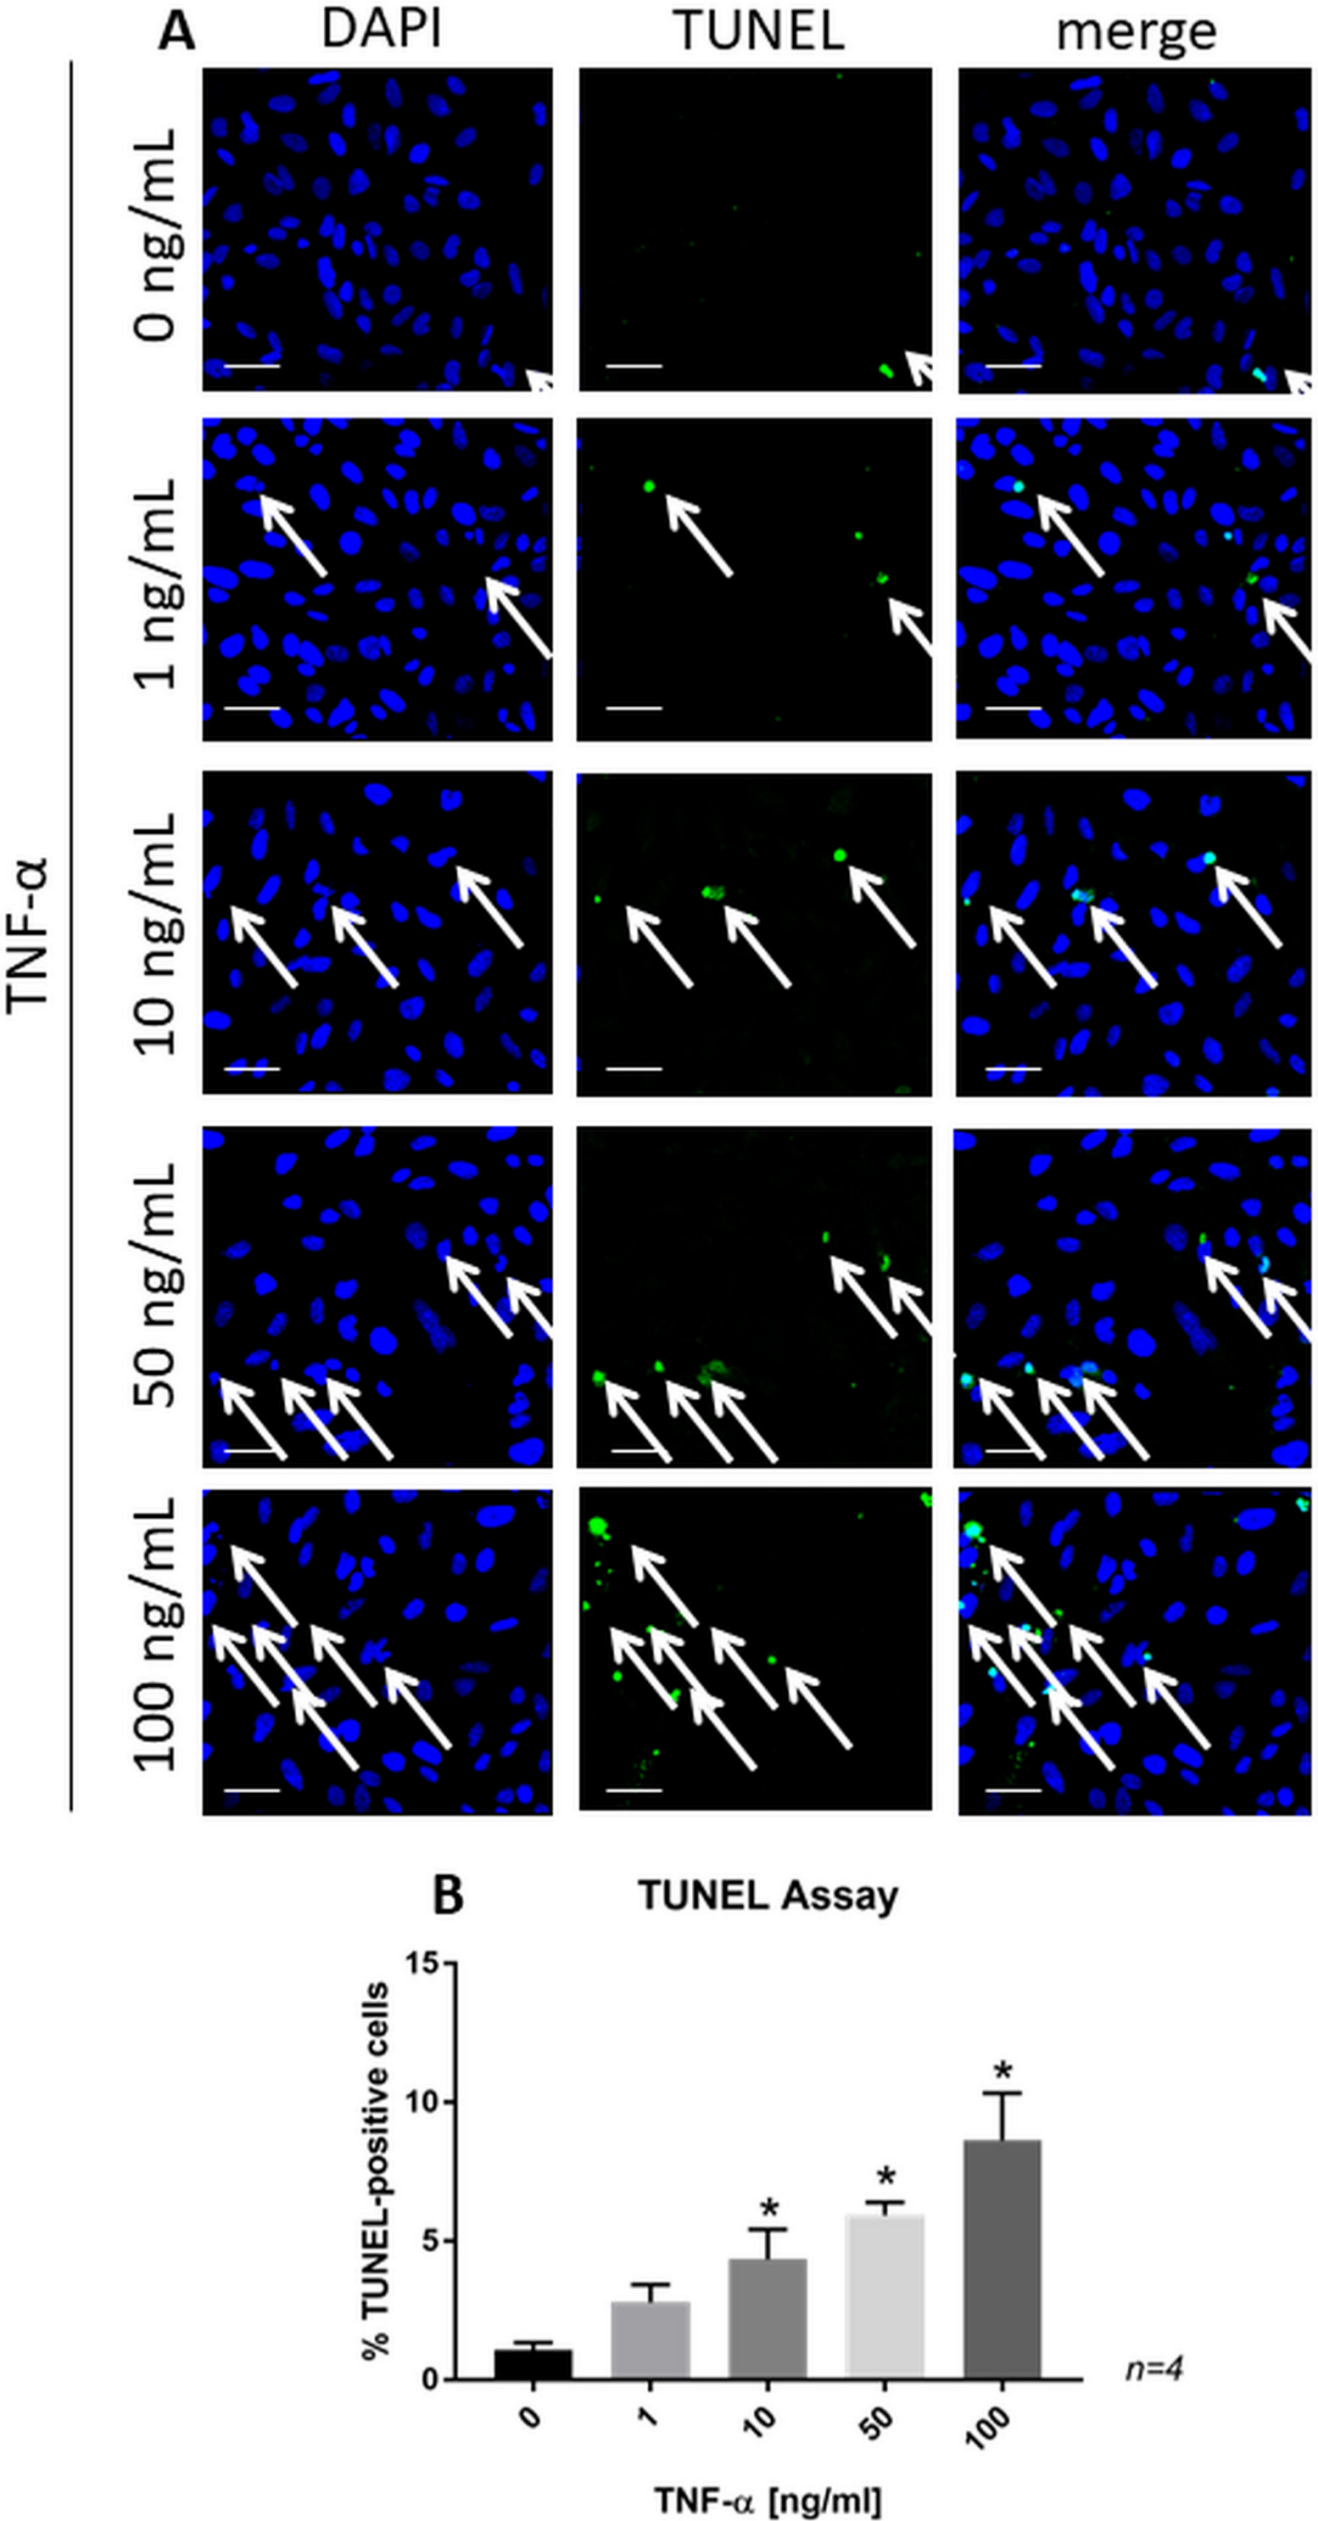 Fig. 6 
            a) Confocal images of terminal deoxynucleotidyl transferase-mediated dUTP nick end labelling (TUNEL)-stained SaOs-2 cells treated with recombinant tumour necrosis factor-alpha (TNF-α) for 24 hours. Scale bars = 50 μm. b) Bar chart representing the significant changes in the percentage of TUNEL-positive cells. Data are presented as the mean ± SD. *p < 0.01 versus control group, evaluated by one-way analysis of variance followed by post-hoc analysis using Dunnett’s multiple comparisons test. DAPI, 4′,6-diamidino-2-phenylindole.
          